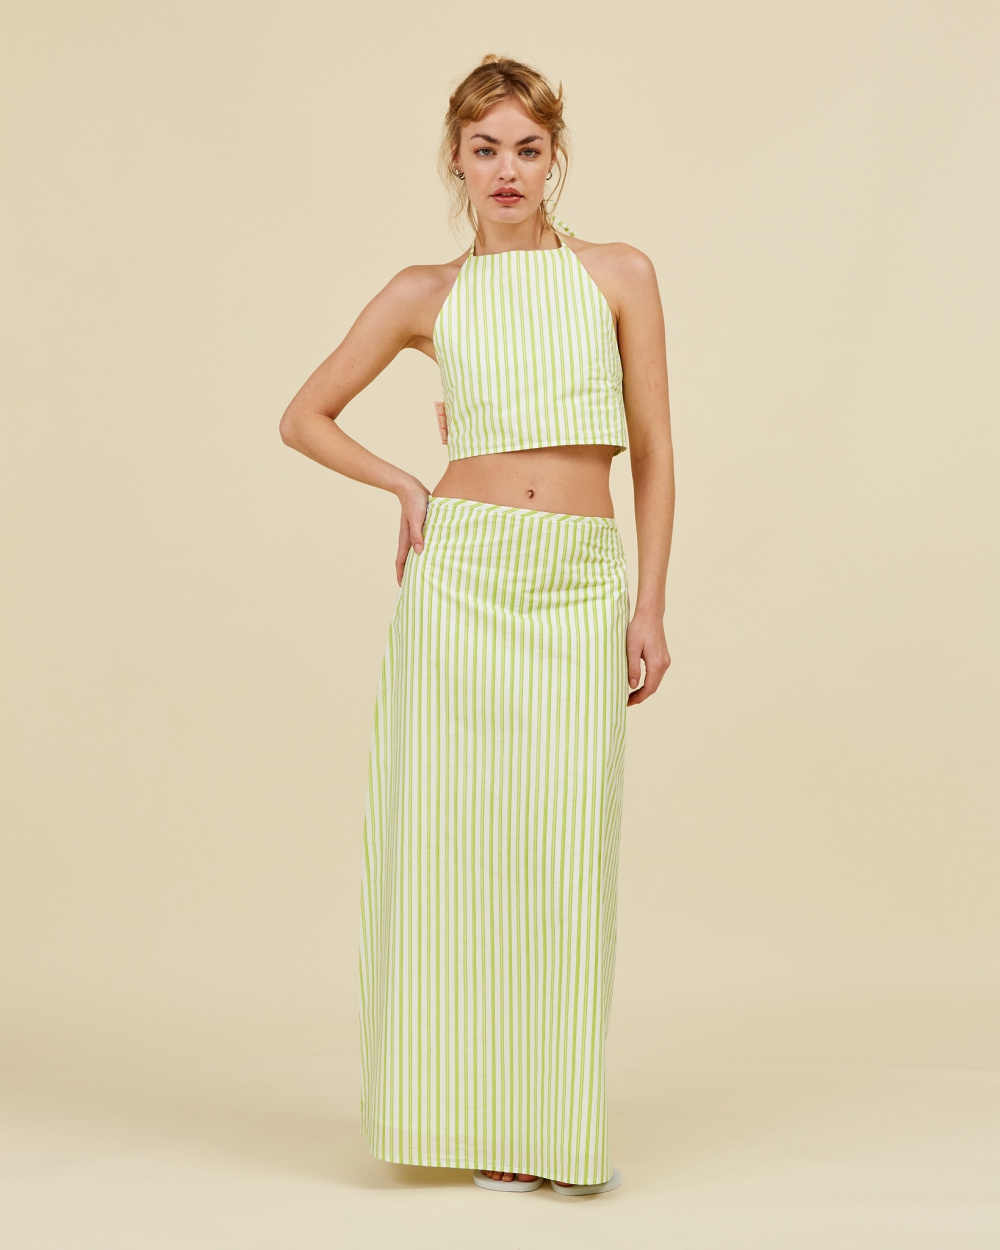 https://www.seamehappy.be/wp-content/uploads/2023/01/Sea-Me-Happy-Zoe-Top-striped-lime-front.jpg